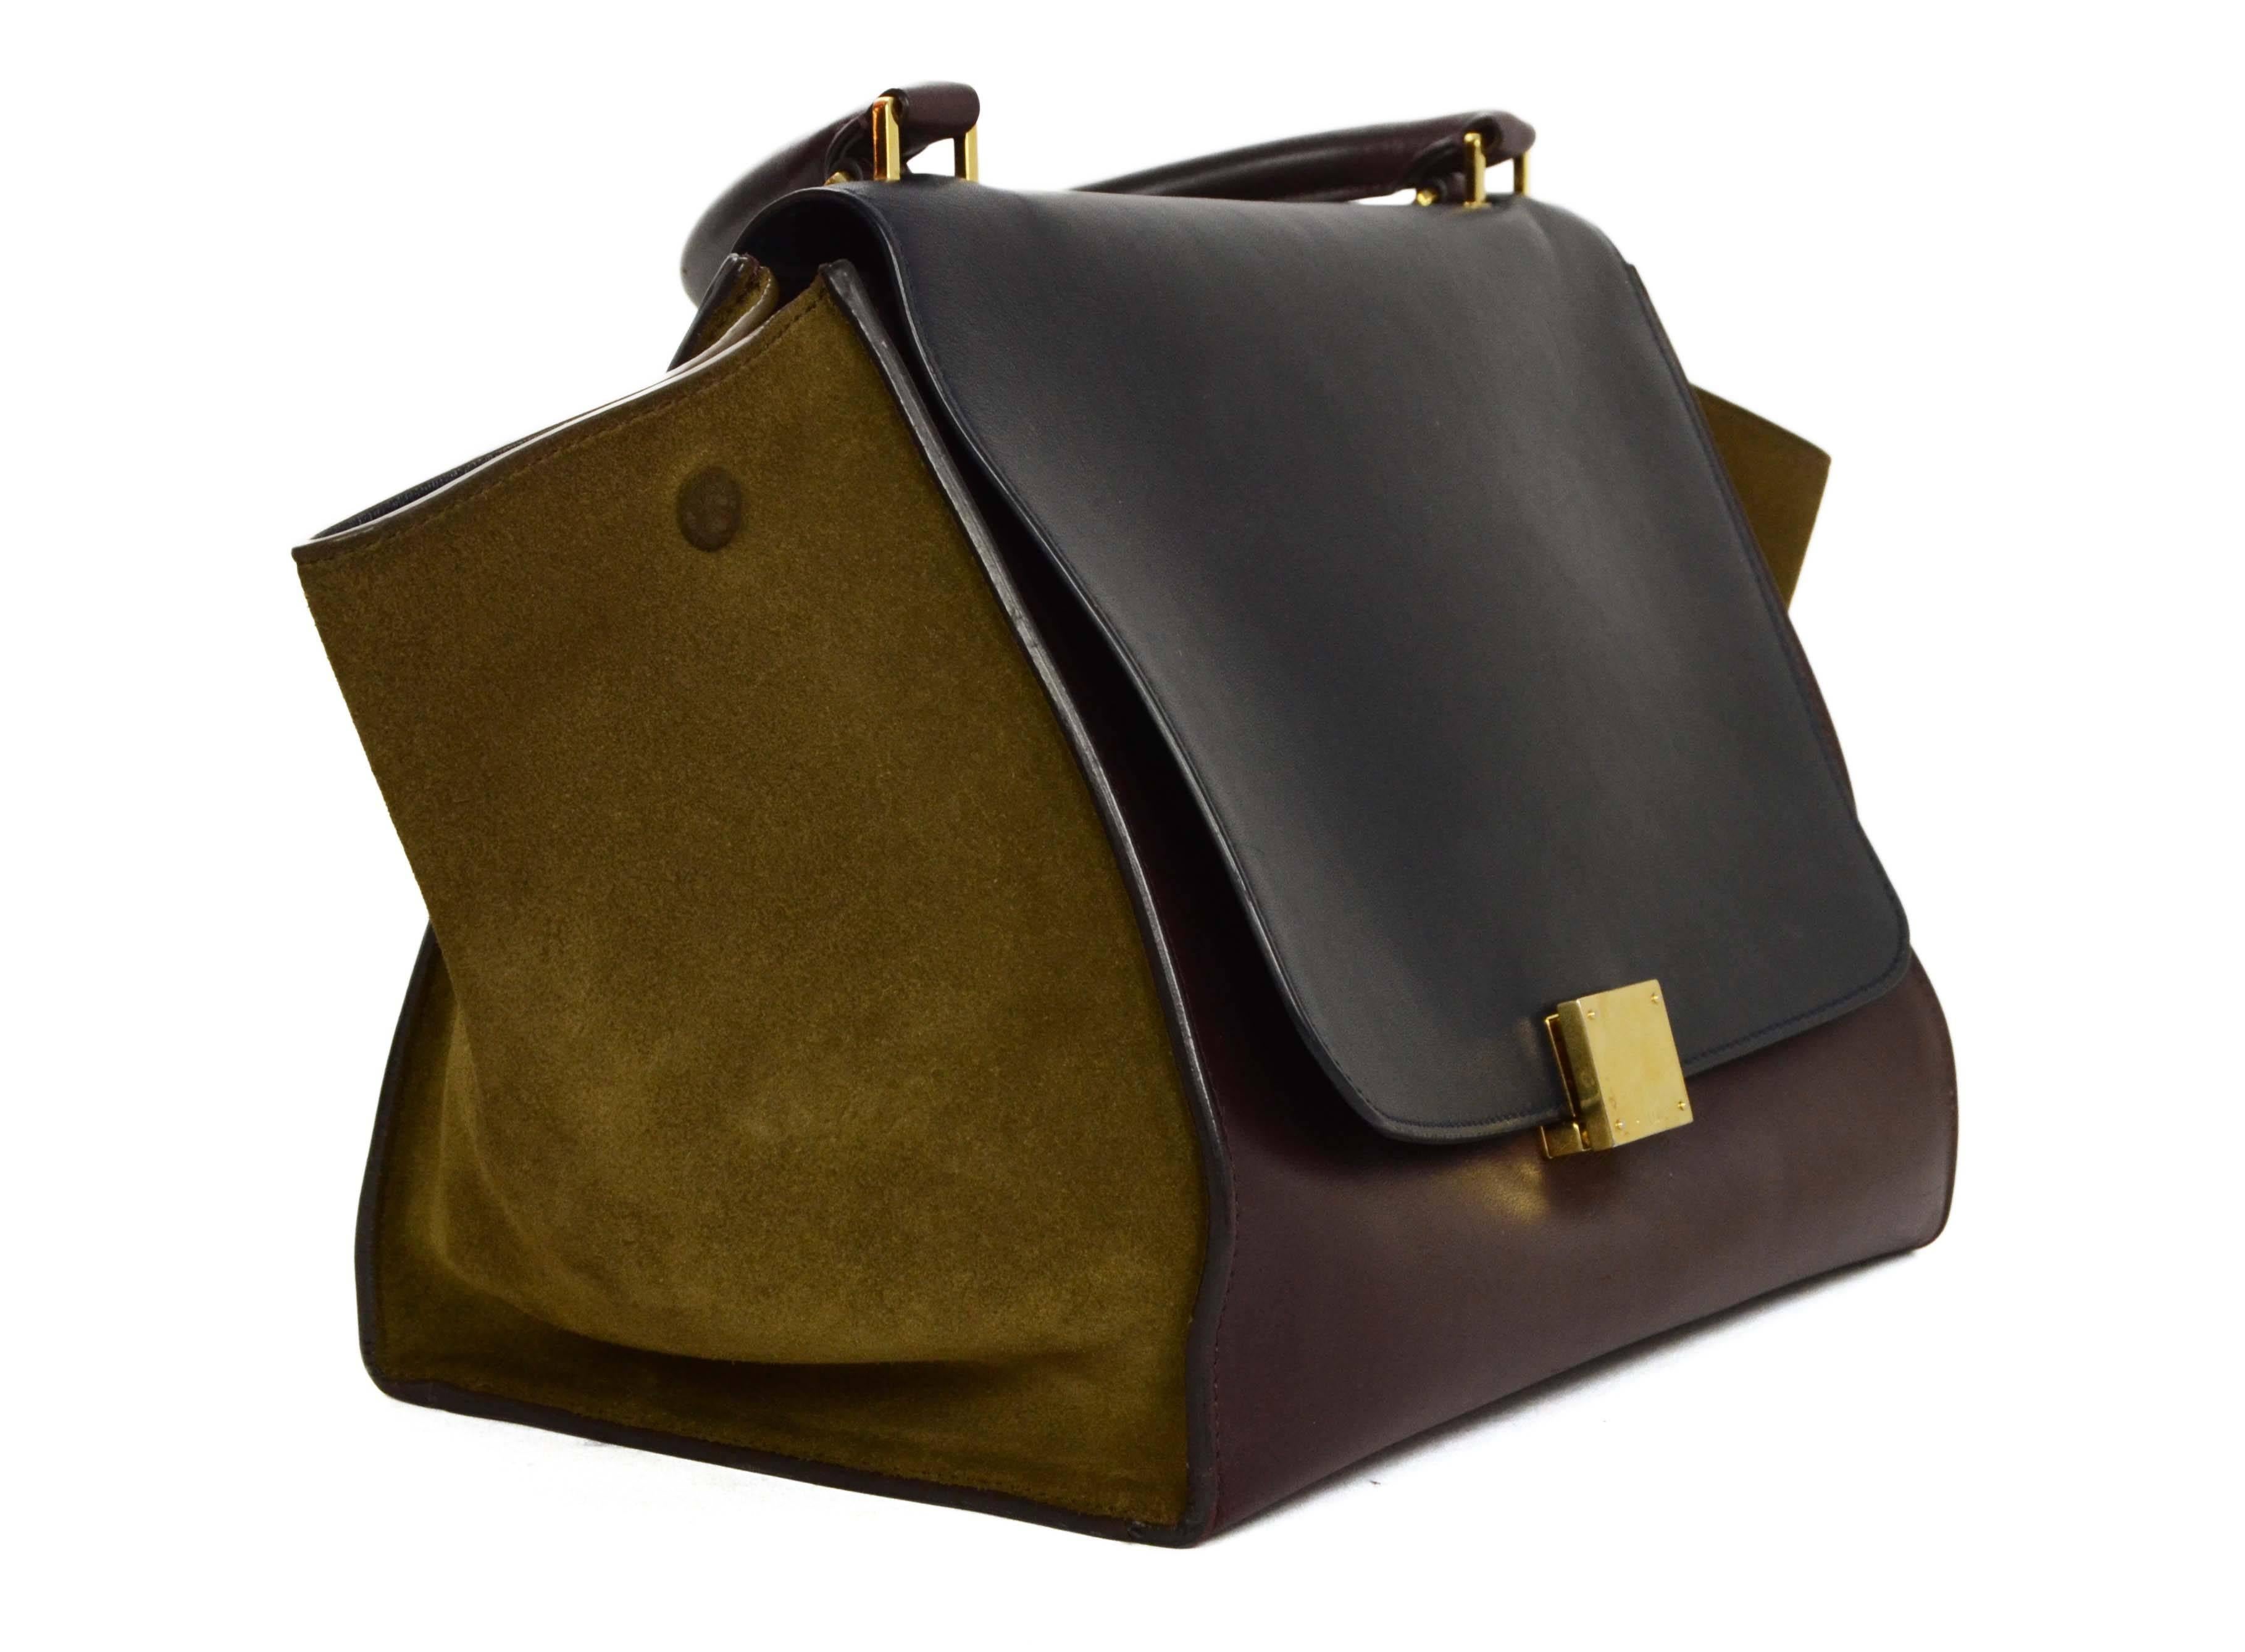 Celine Tri-Color Leather & Suede Trapeze Bag 
*Note: Missing long shoulder strap*
Made In: Italy
Color: Burgundy, navy, olive green and goldtone
Hardware: Goldtone
Materials: Leather, suede and metal
Lining: Navy leather
Closure/Opening: Flap